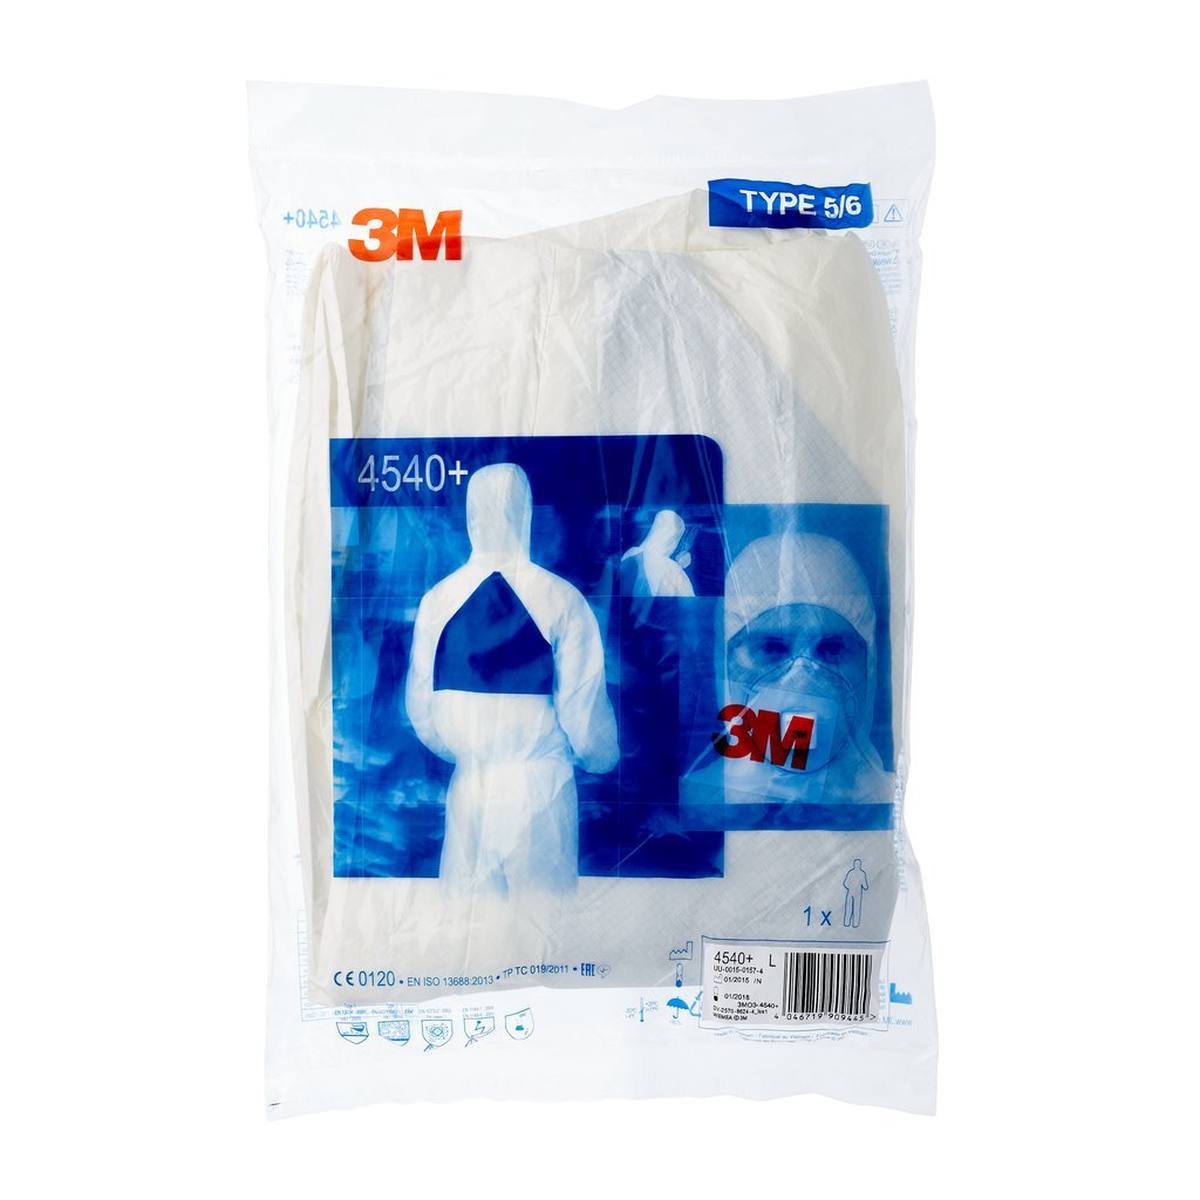 3M 4540 coverall, white blue, type 5/6, size 3XL, robust, lint-free, reinforced seams, SMMMS material, breathable, detachable zipper, knitted cuffs